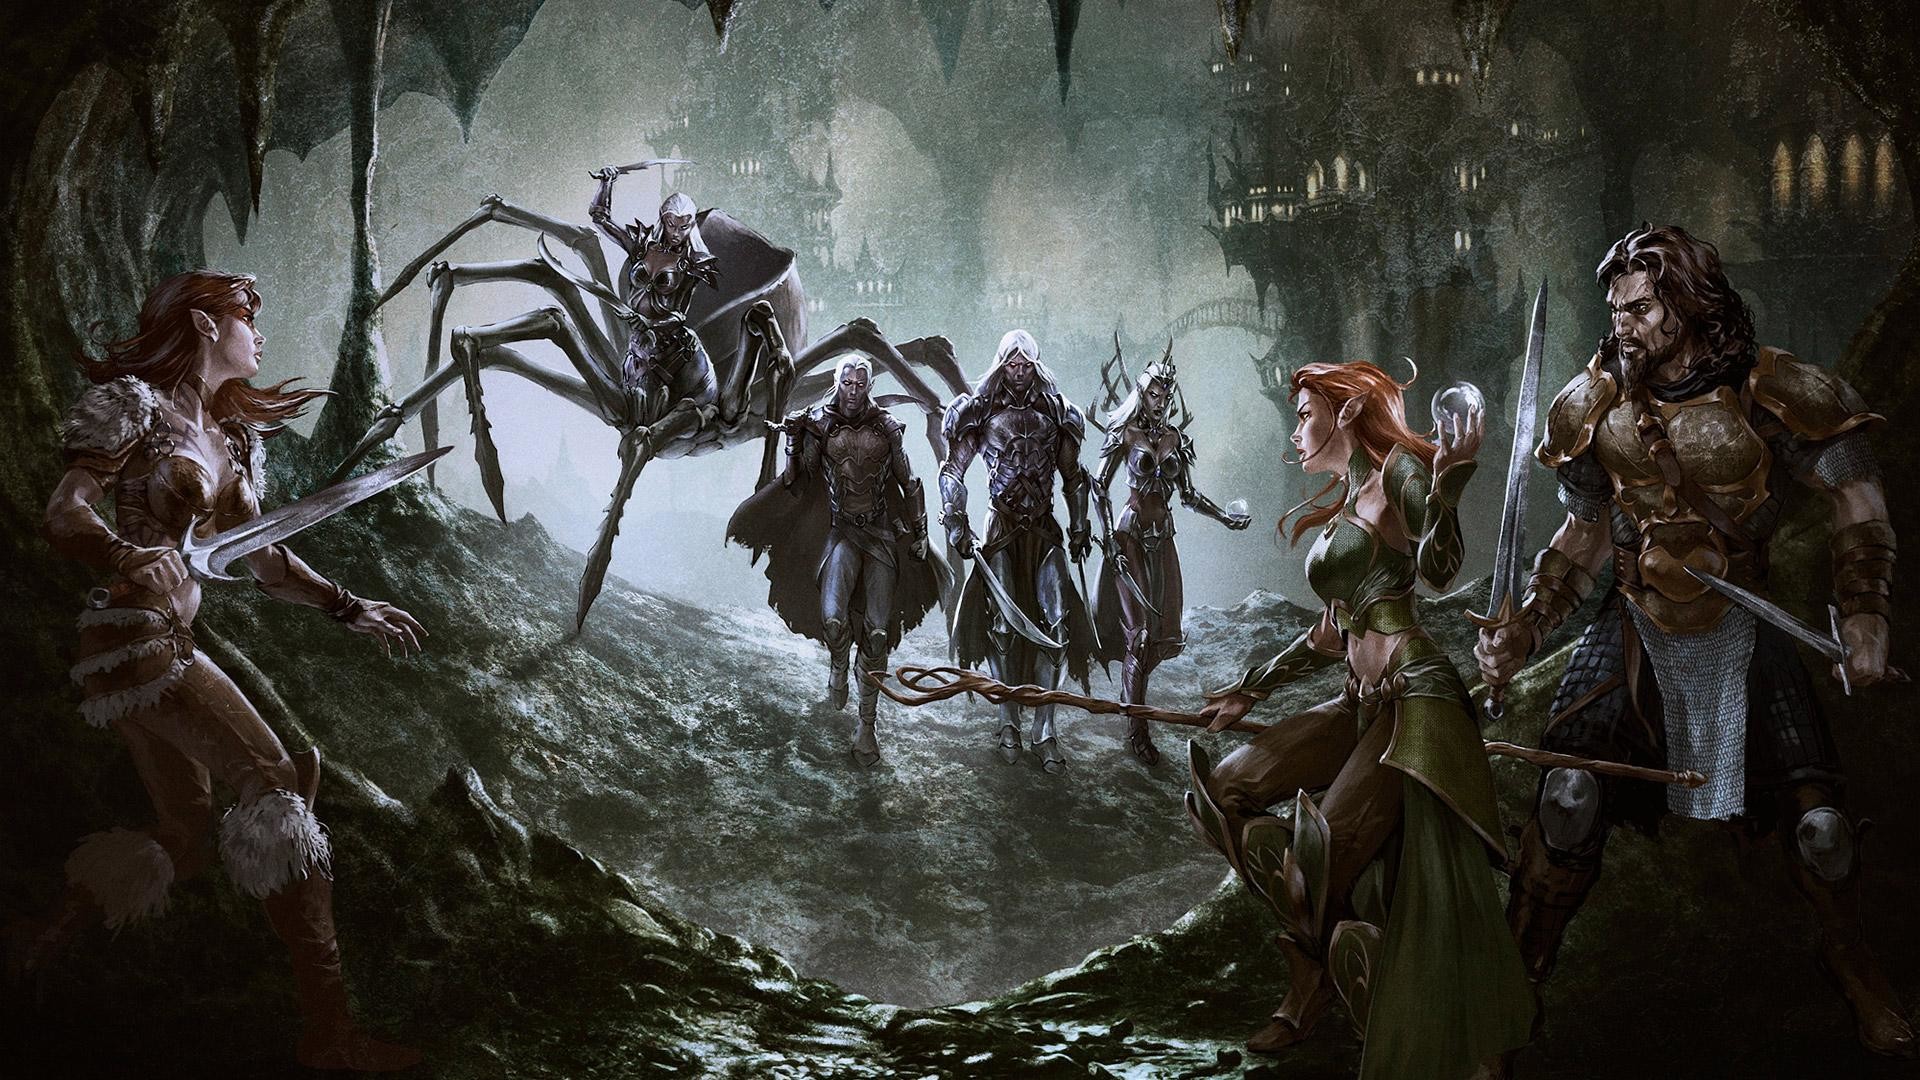 Wallpaper.wiki Dungeons and dragons online drows PIC